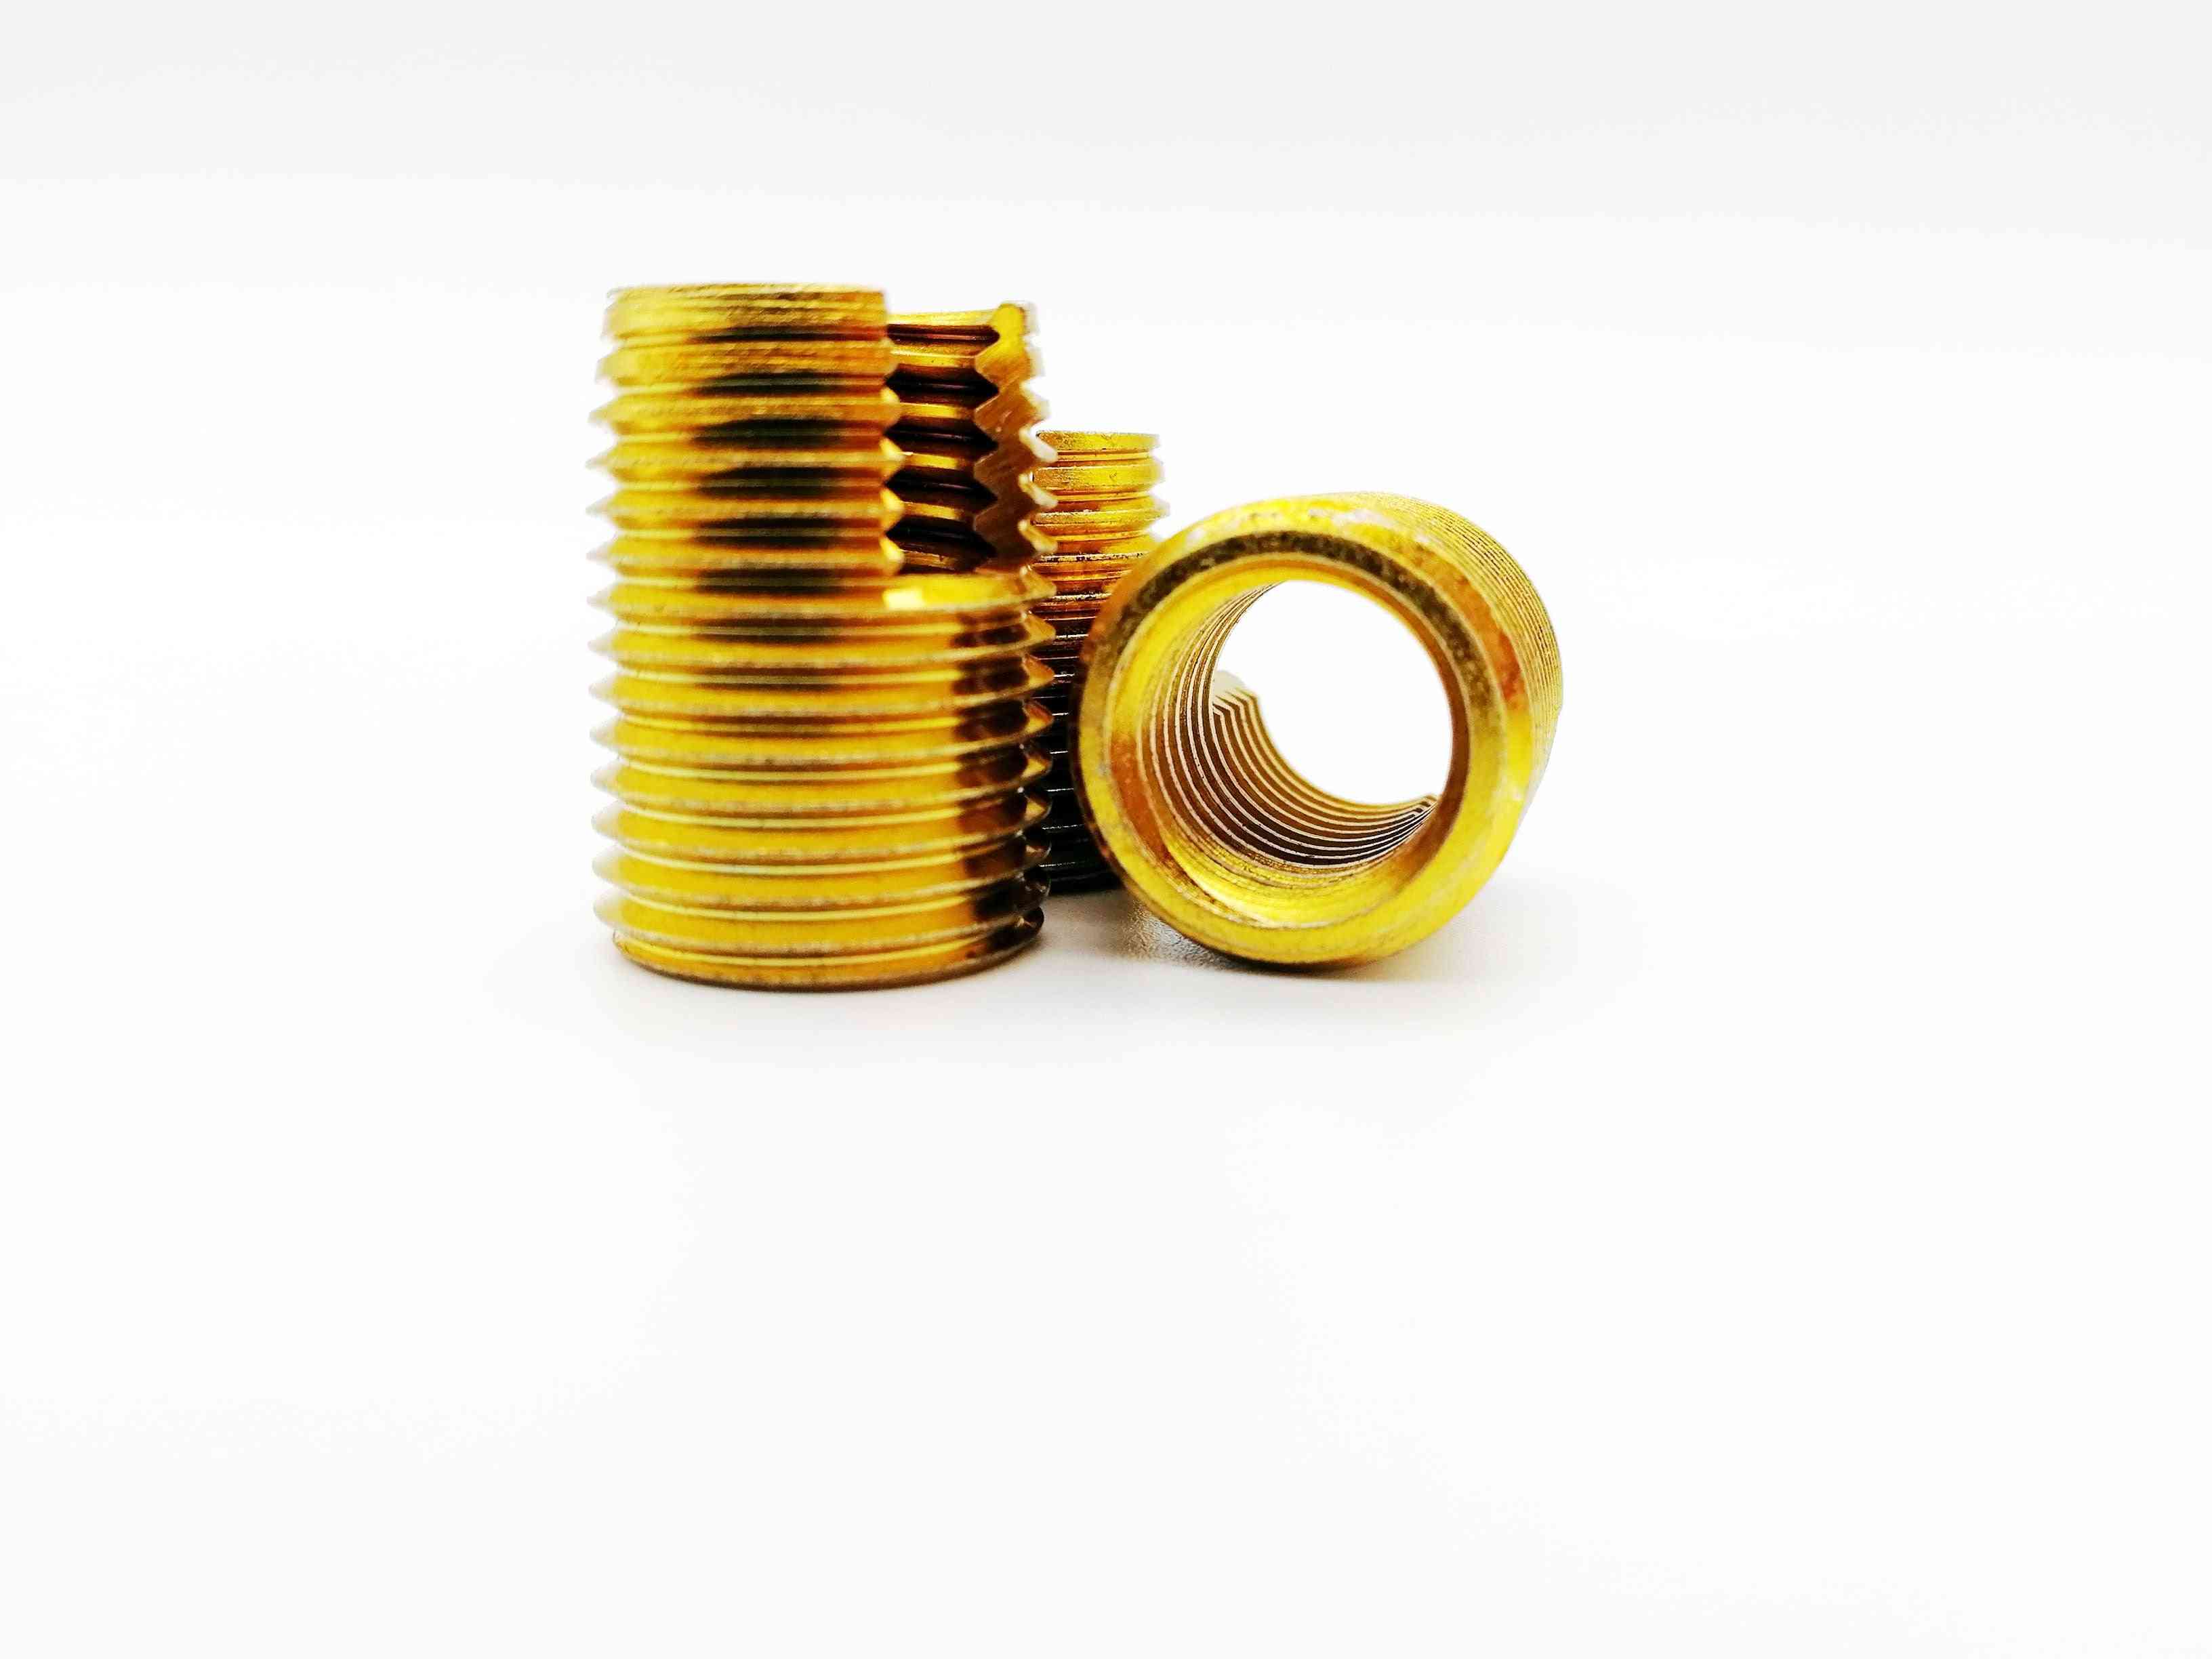 50pcs Of Self-tapping Threaded Insert Set